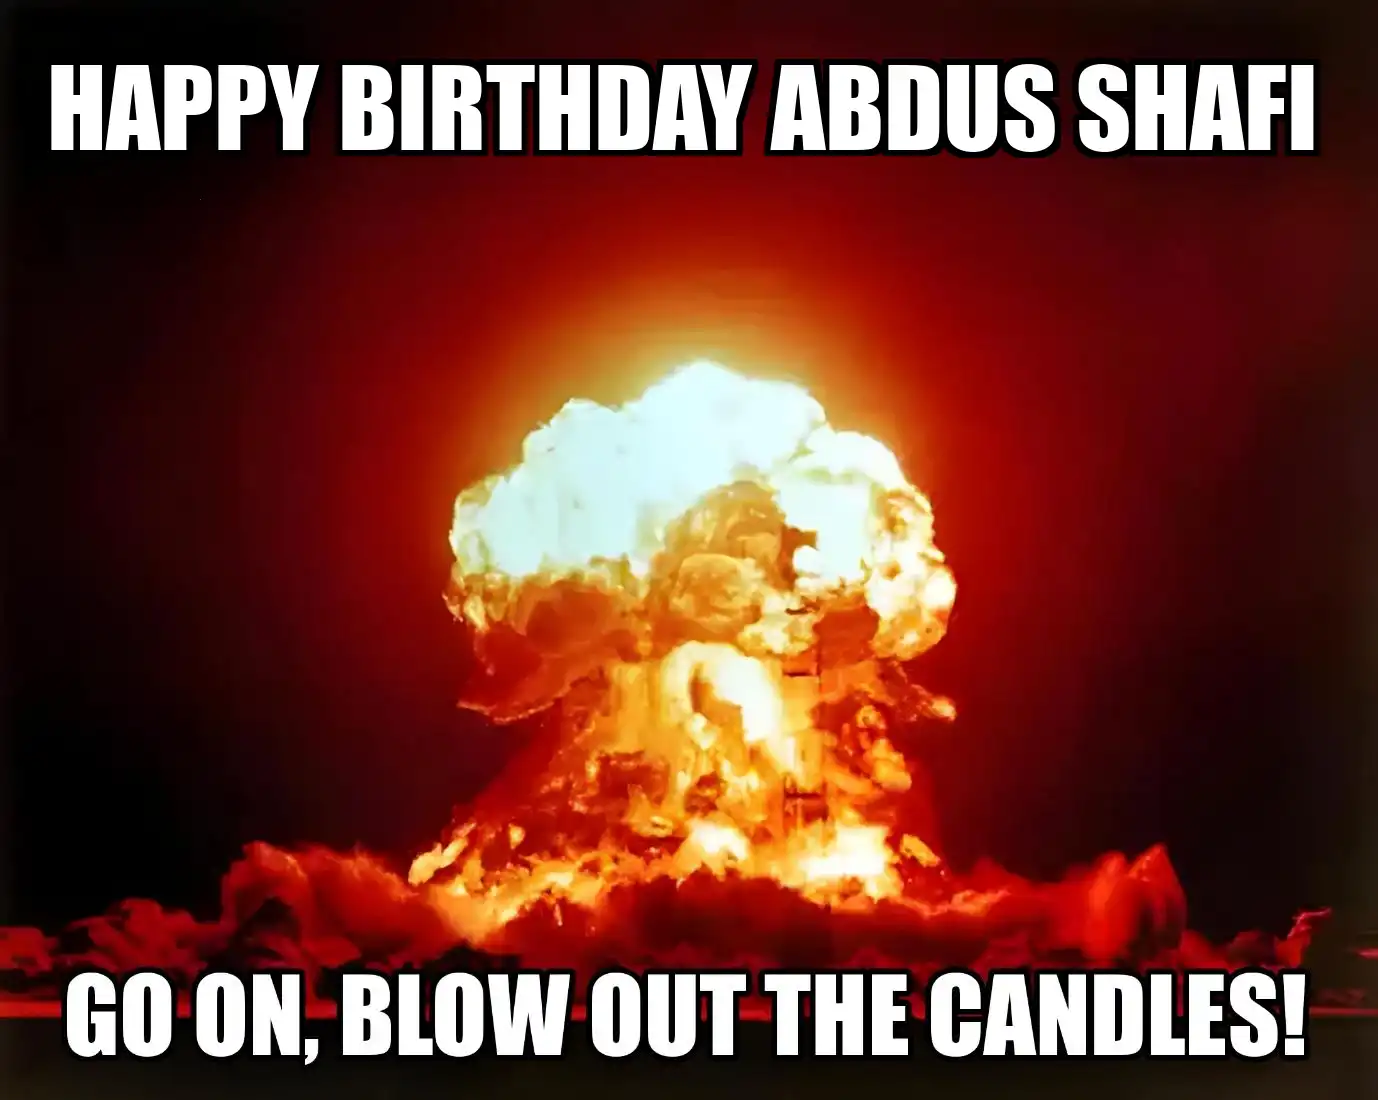 Happy Birthday Abdus Shafi Go On Blow Out The Candles Meme